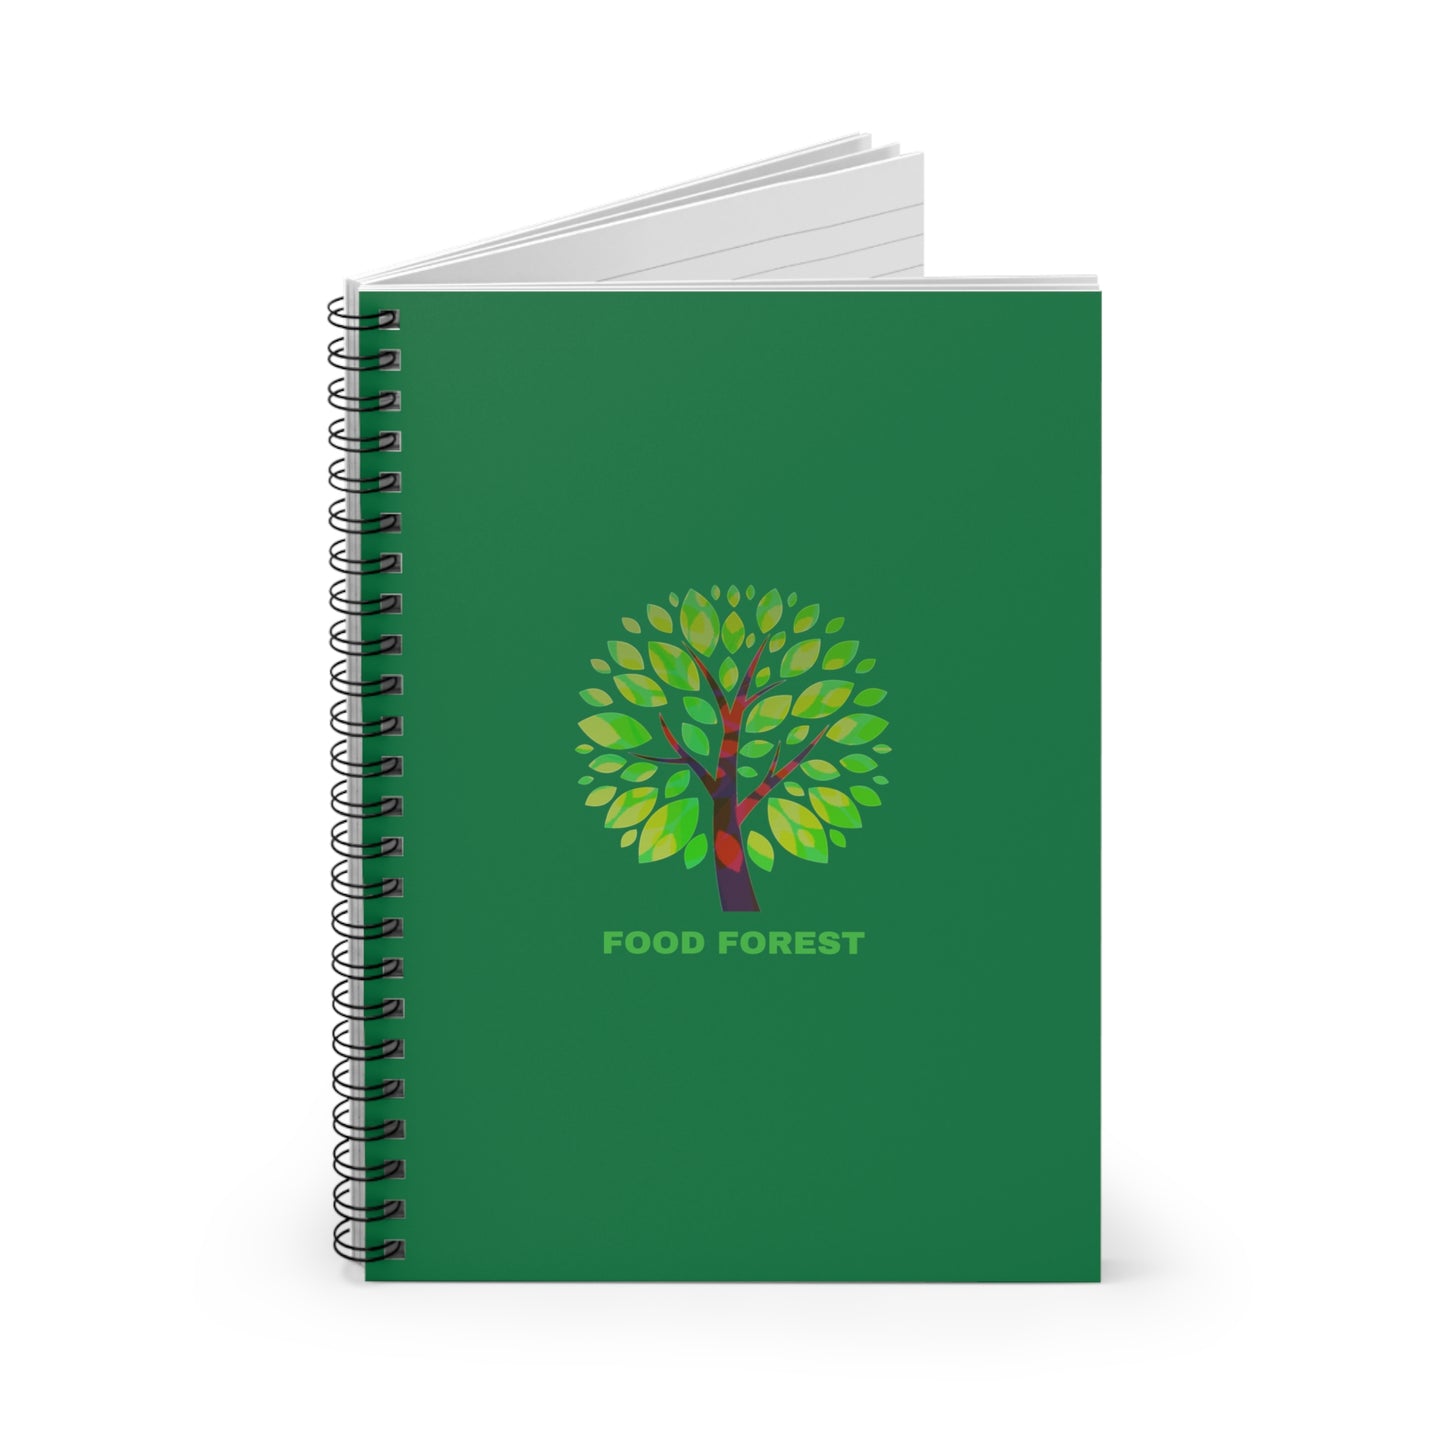 FOOD FOREST Spiral Notebook, Ruled Line, Green Cover